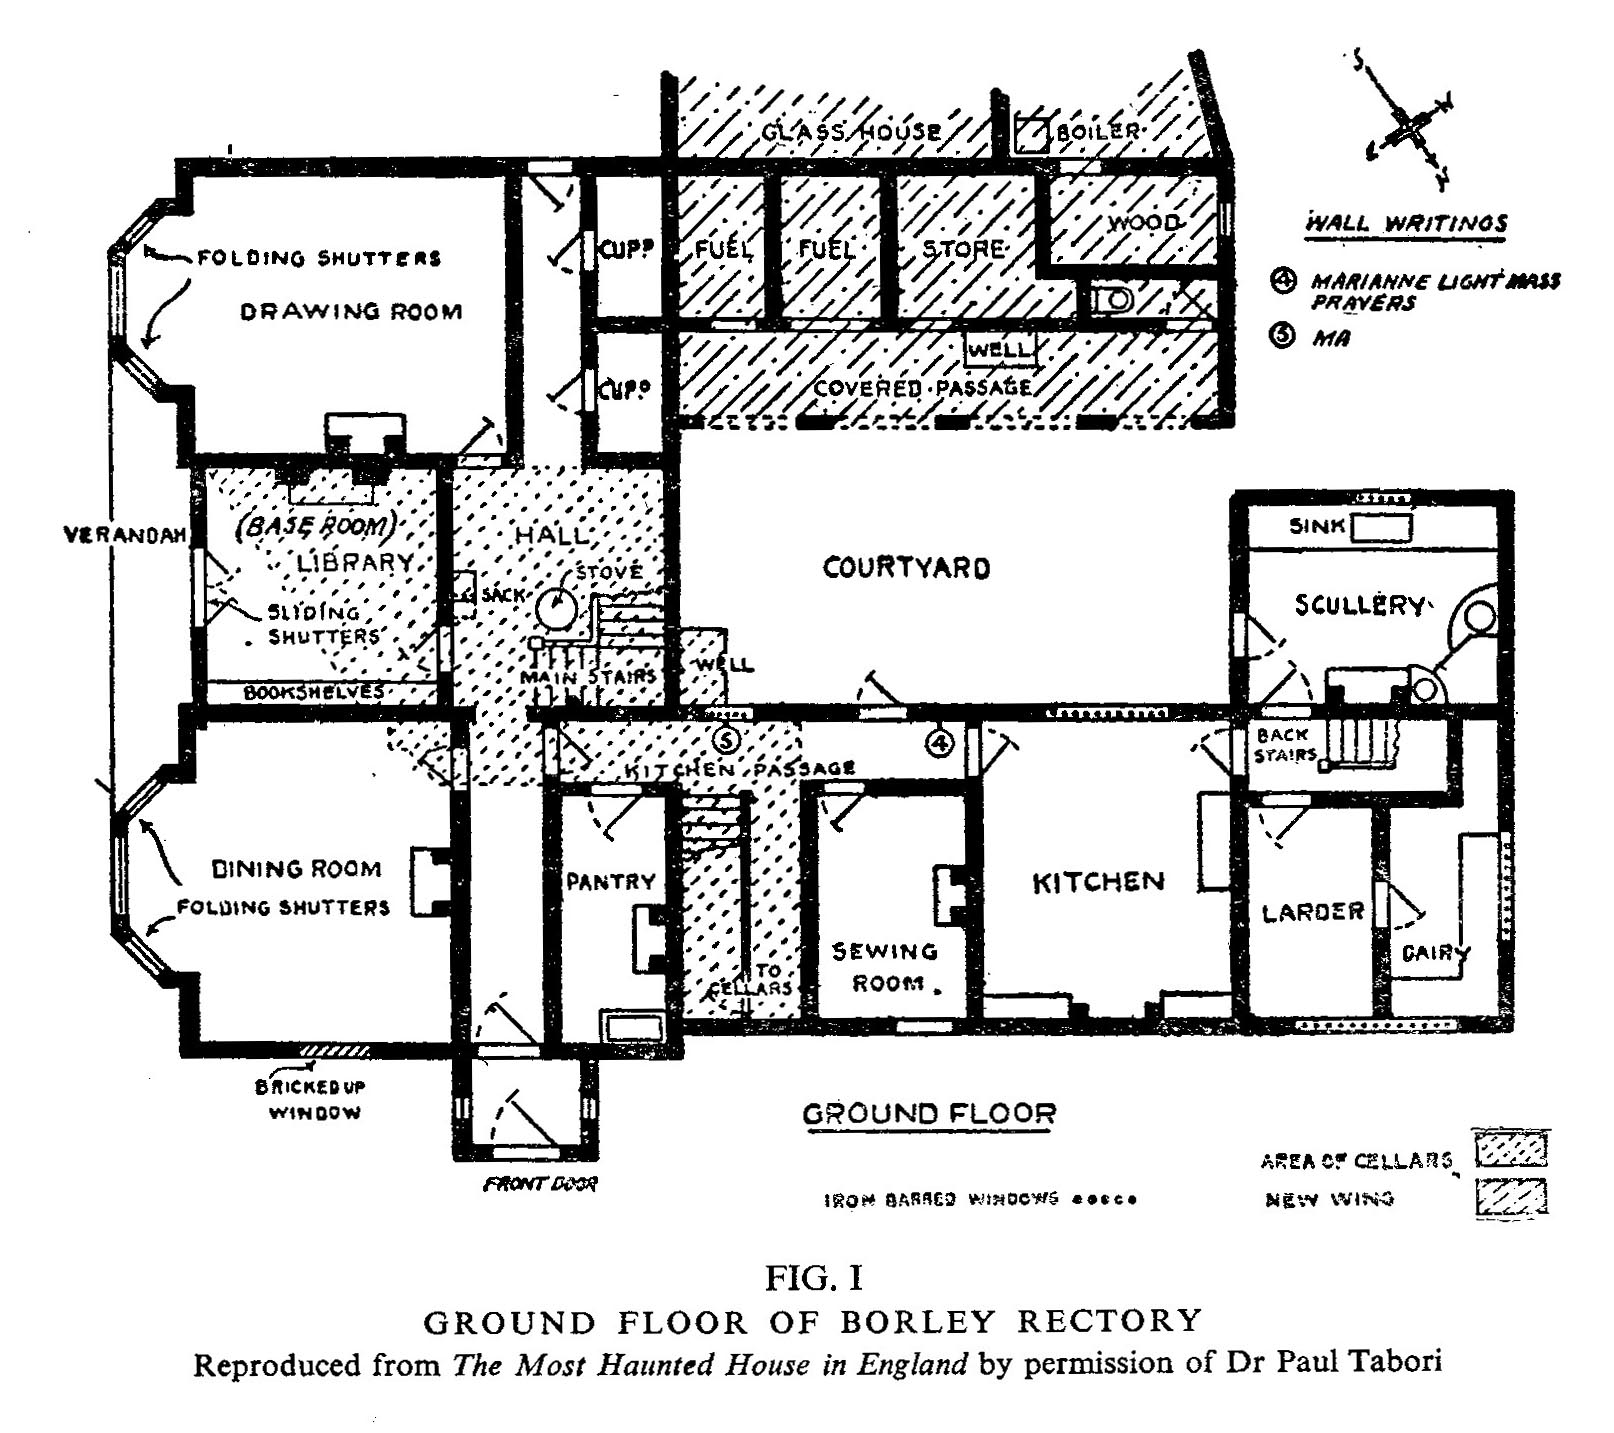 The Haunting of Borley Rectory by Dingwall, Goldney & Hall